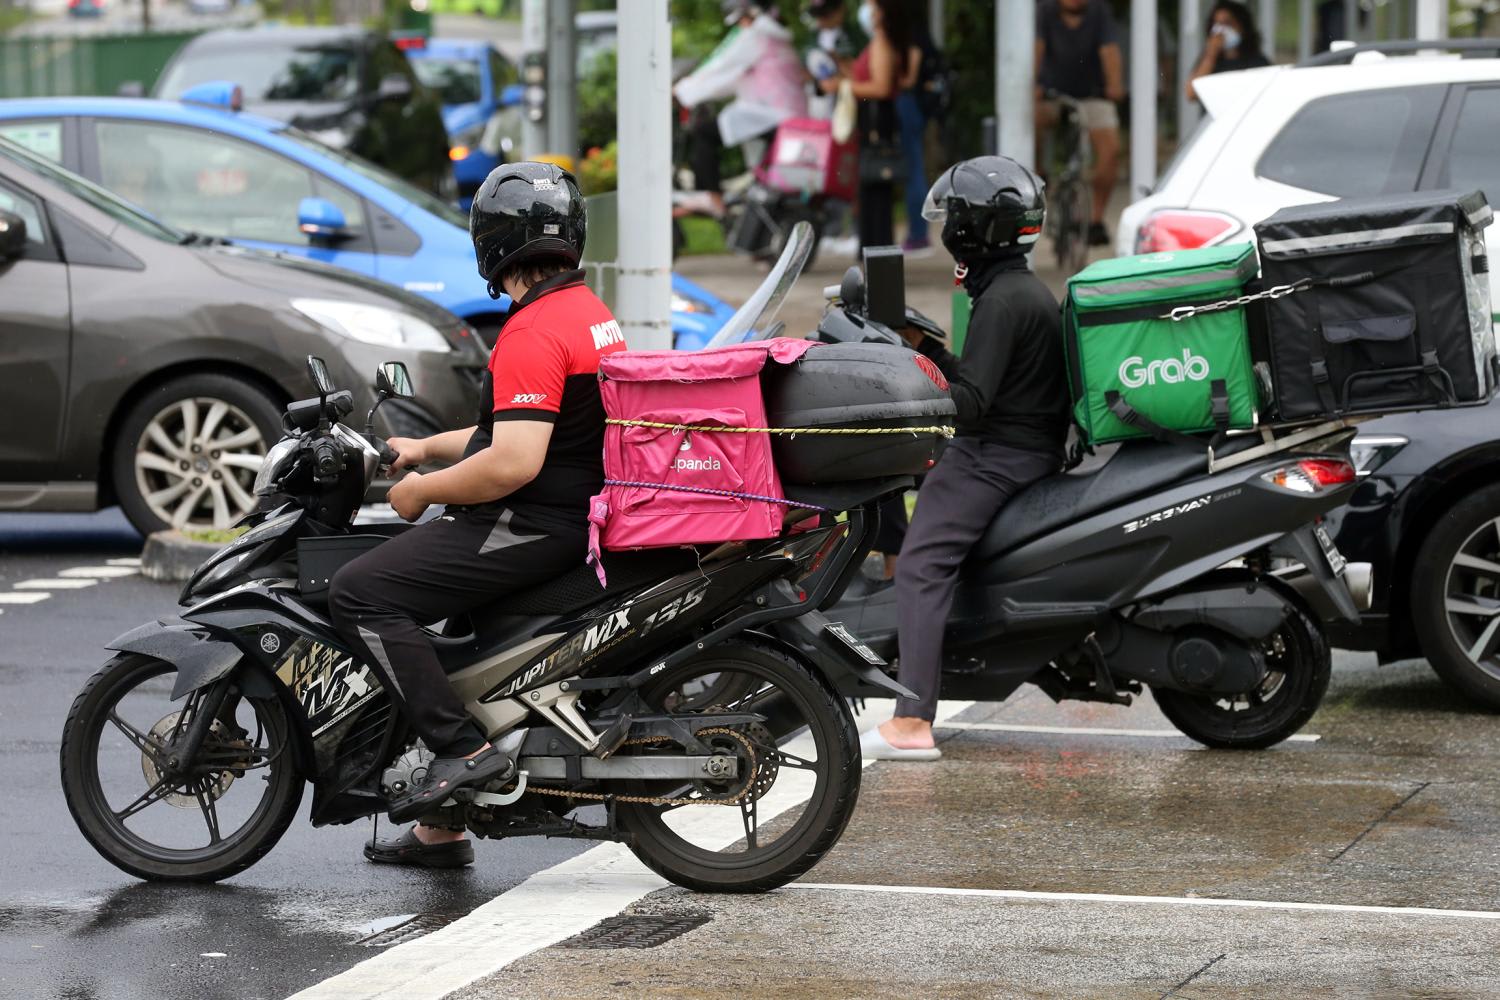 MOM working with food delivery firms to improve safety after 5 riders killed on roads in 18 months